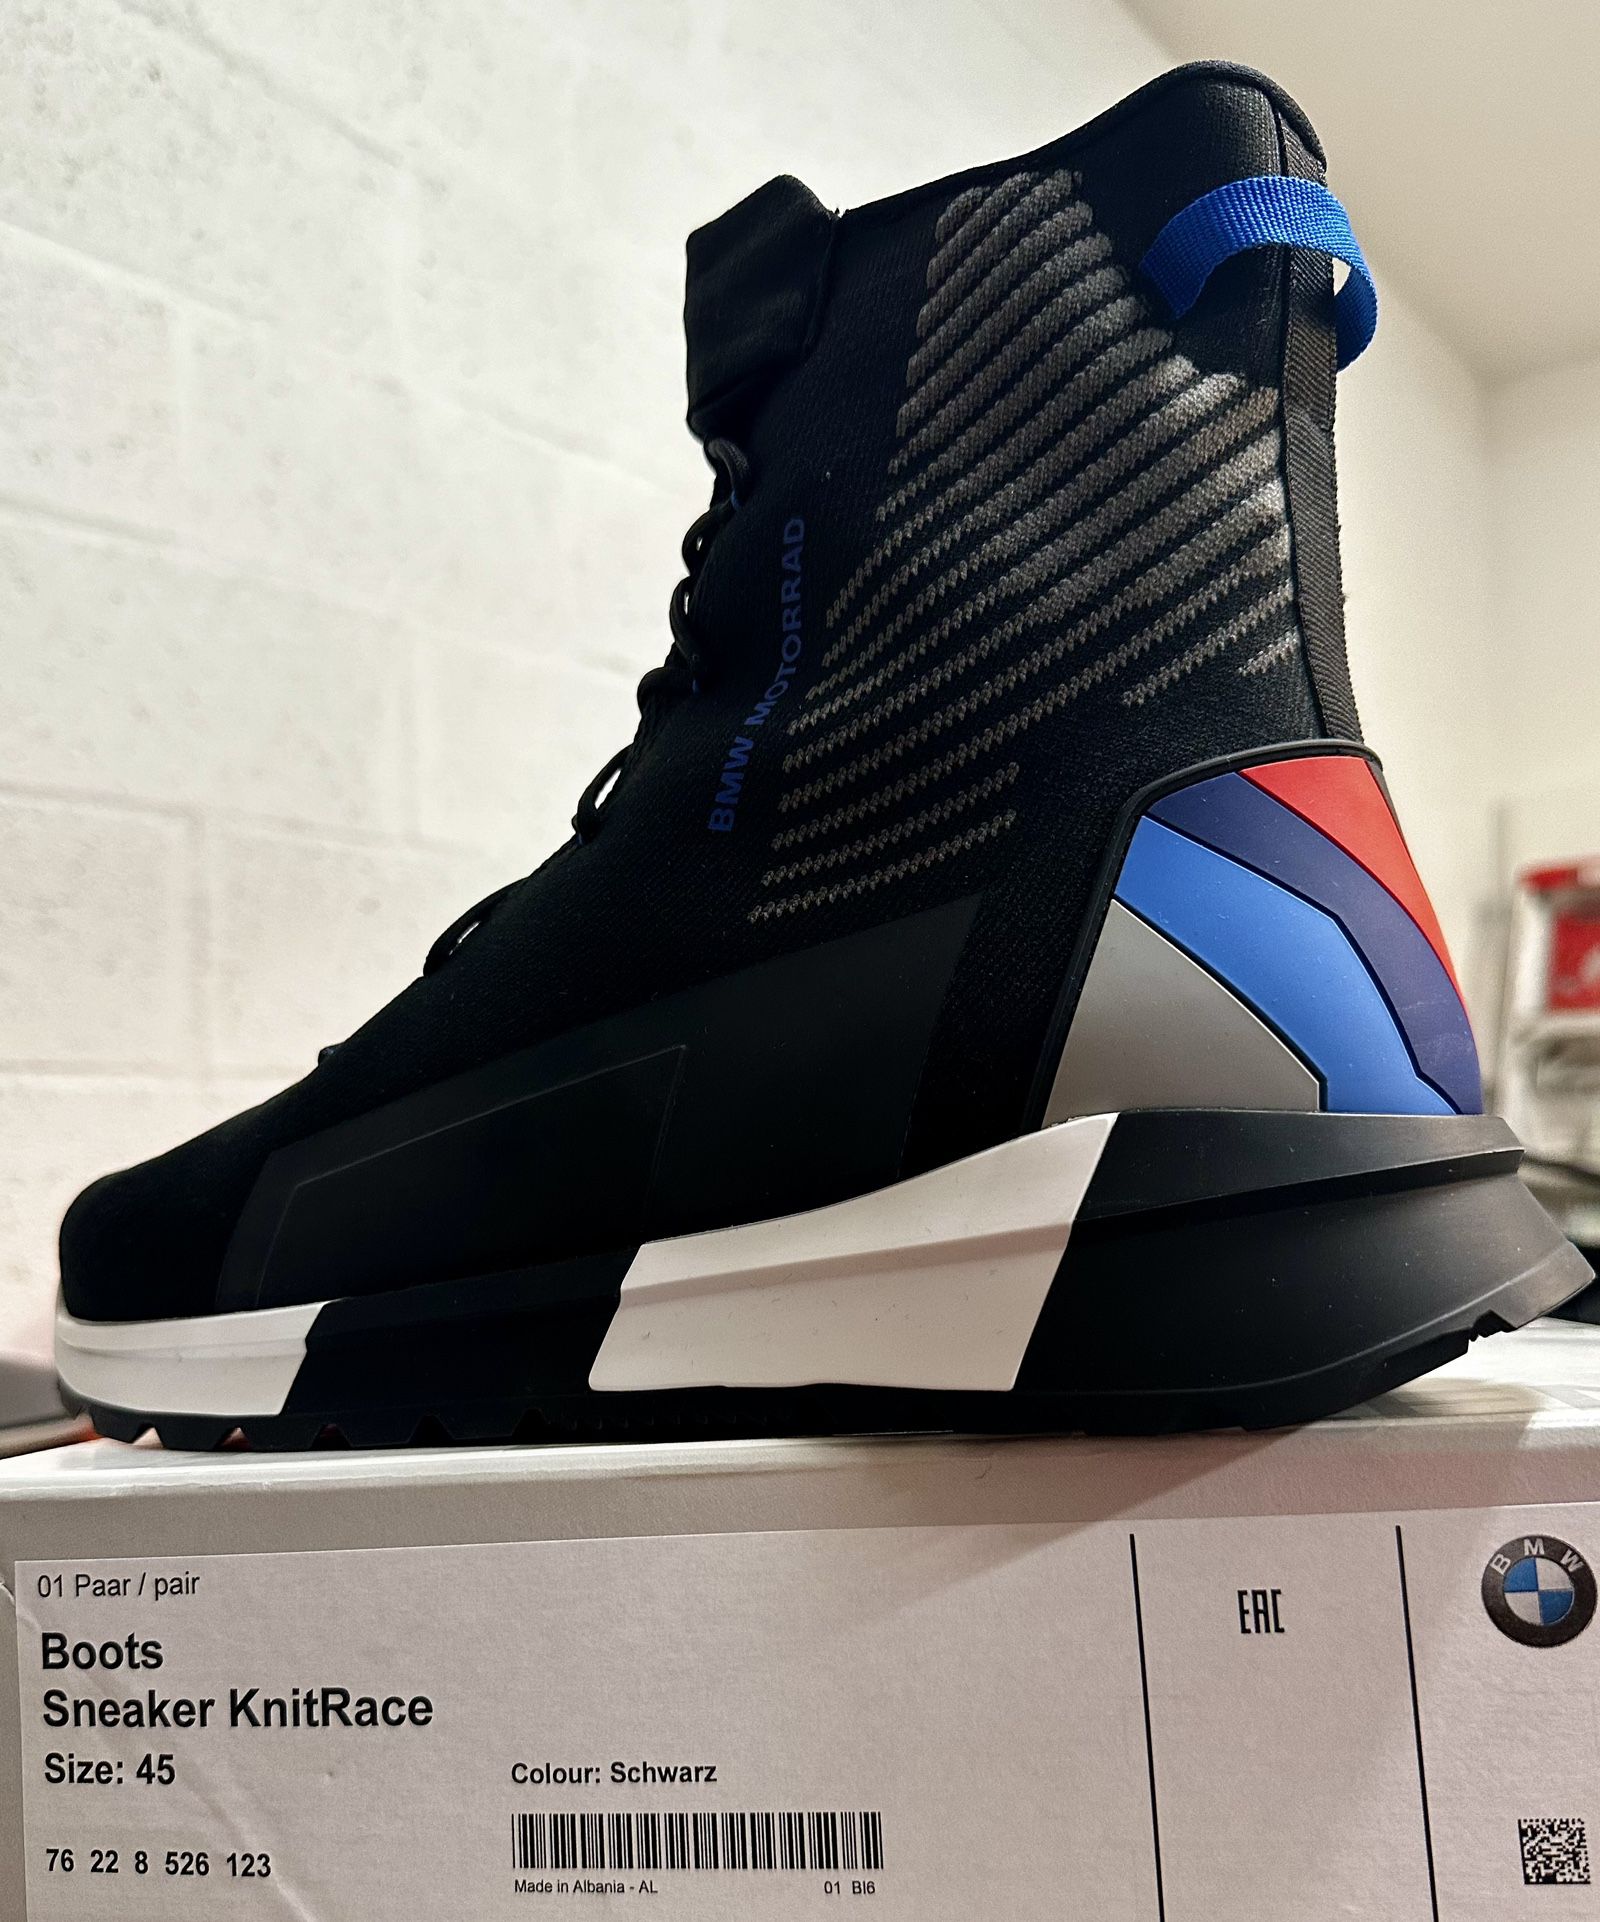 BMW Motorcycle Boots